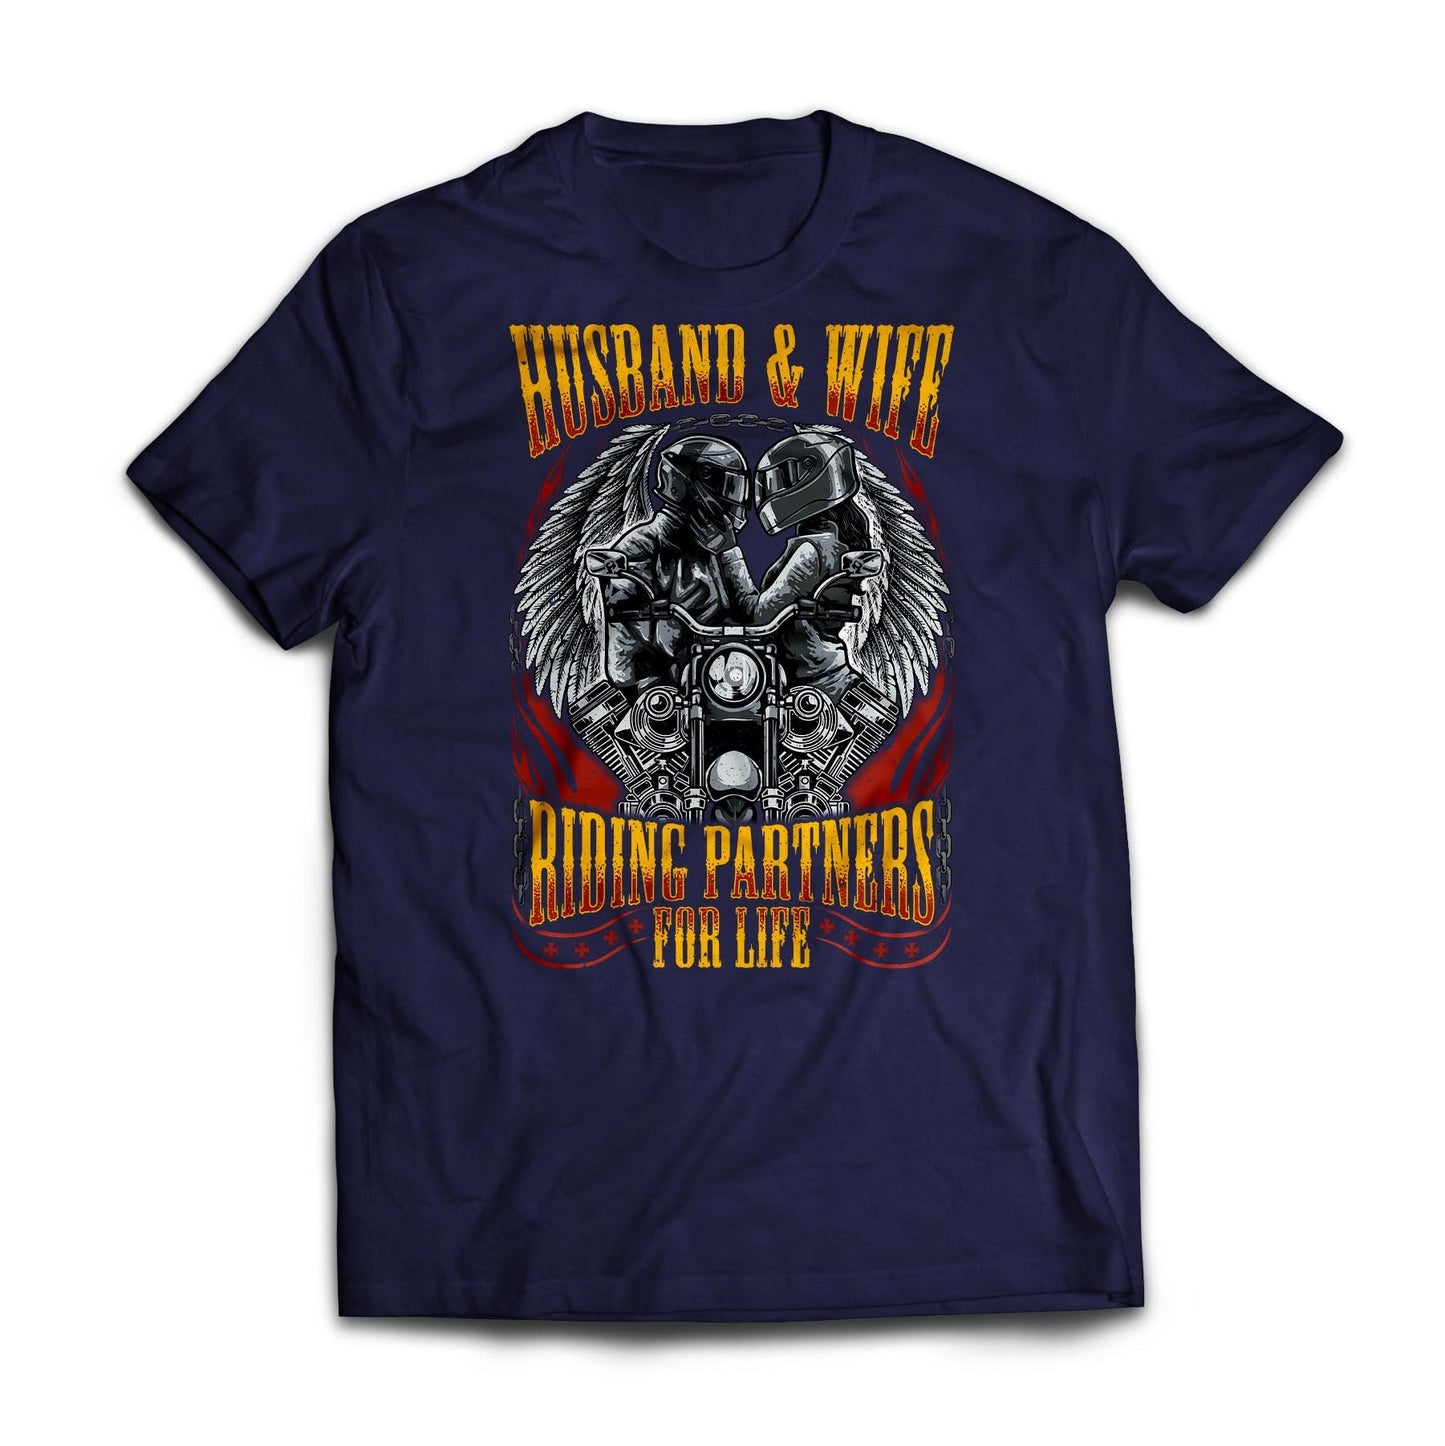 Husband & Wife - Riding Partners For Life - Standard T-shirt